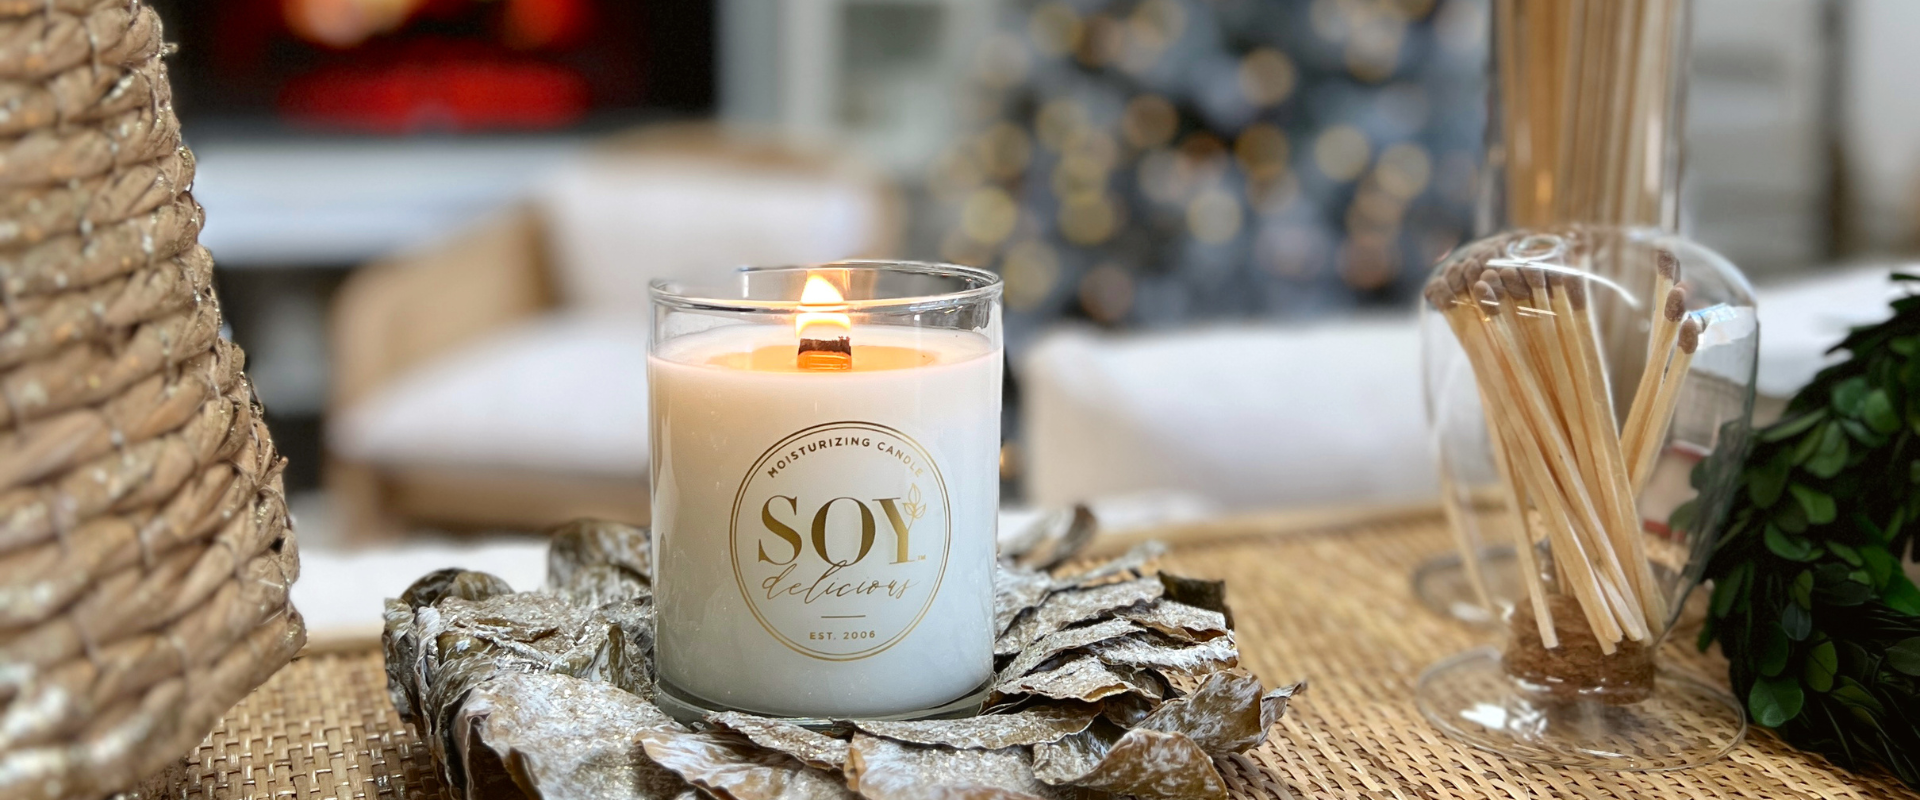 2022 Soy Delicious Candle Gift Guide: The Best Candle Scents for Your Family